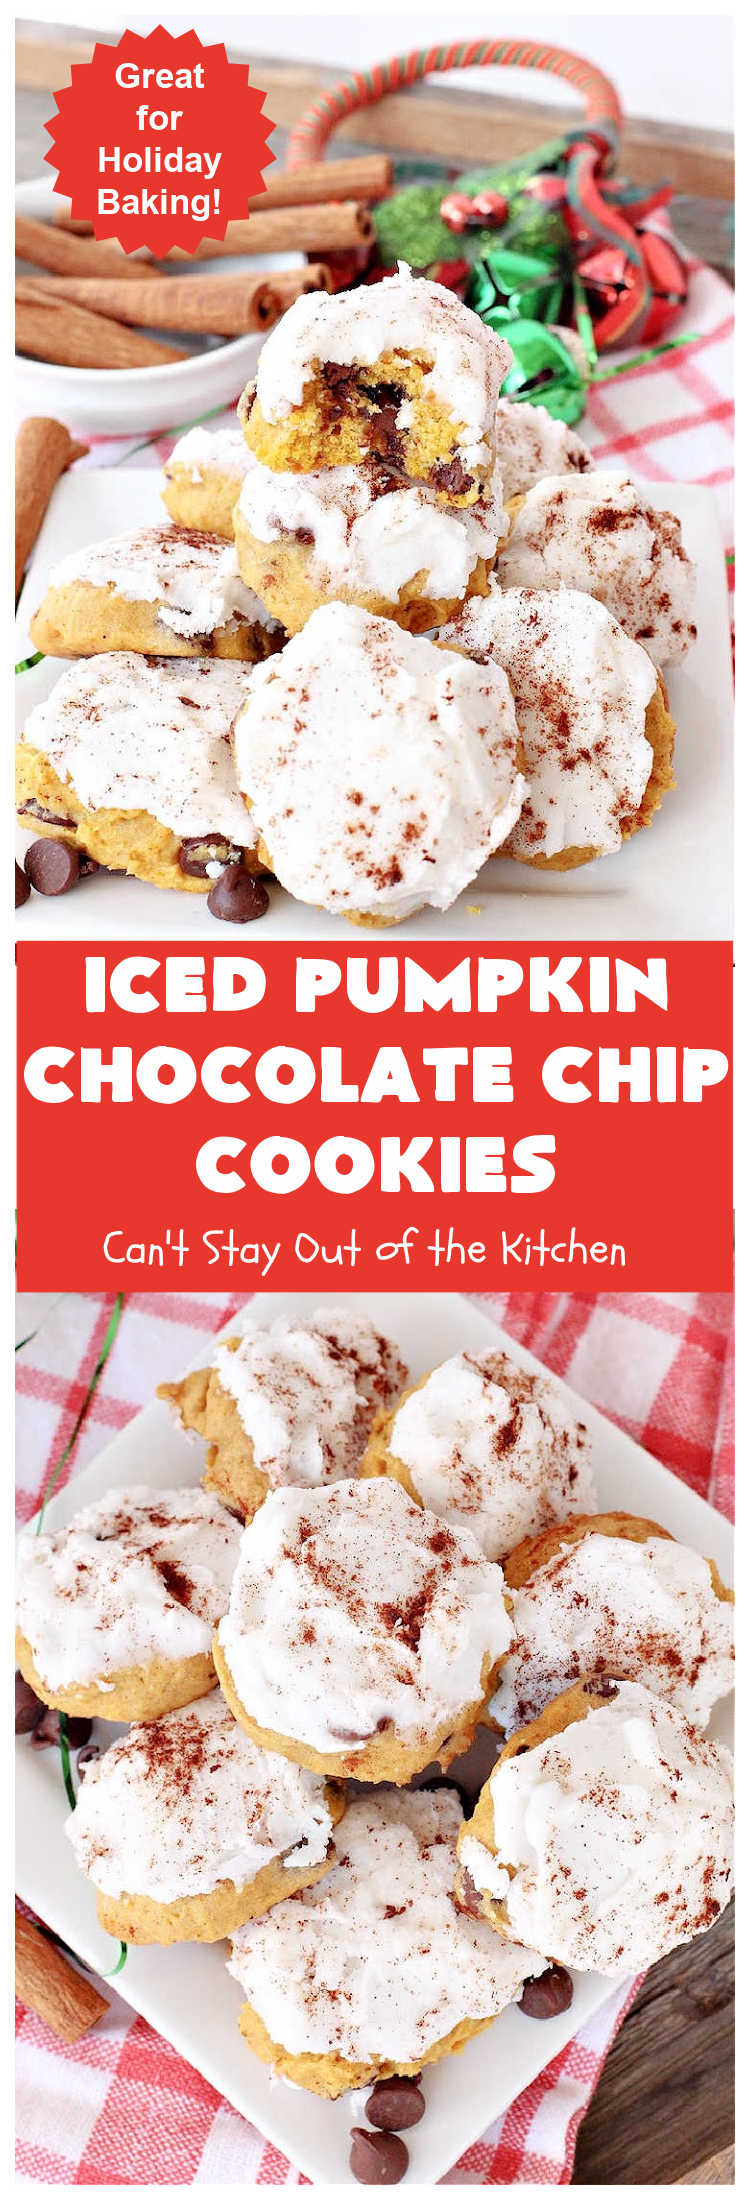 Iced Pumpkin Chocolate Chip Cookies | Can't Stay Out of the Kitchen